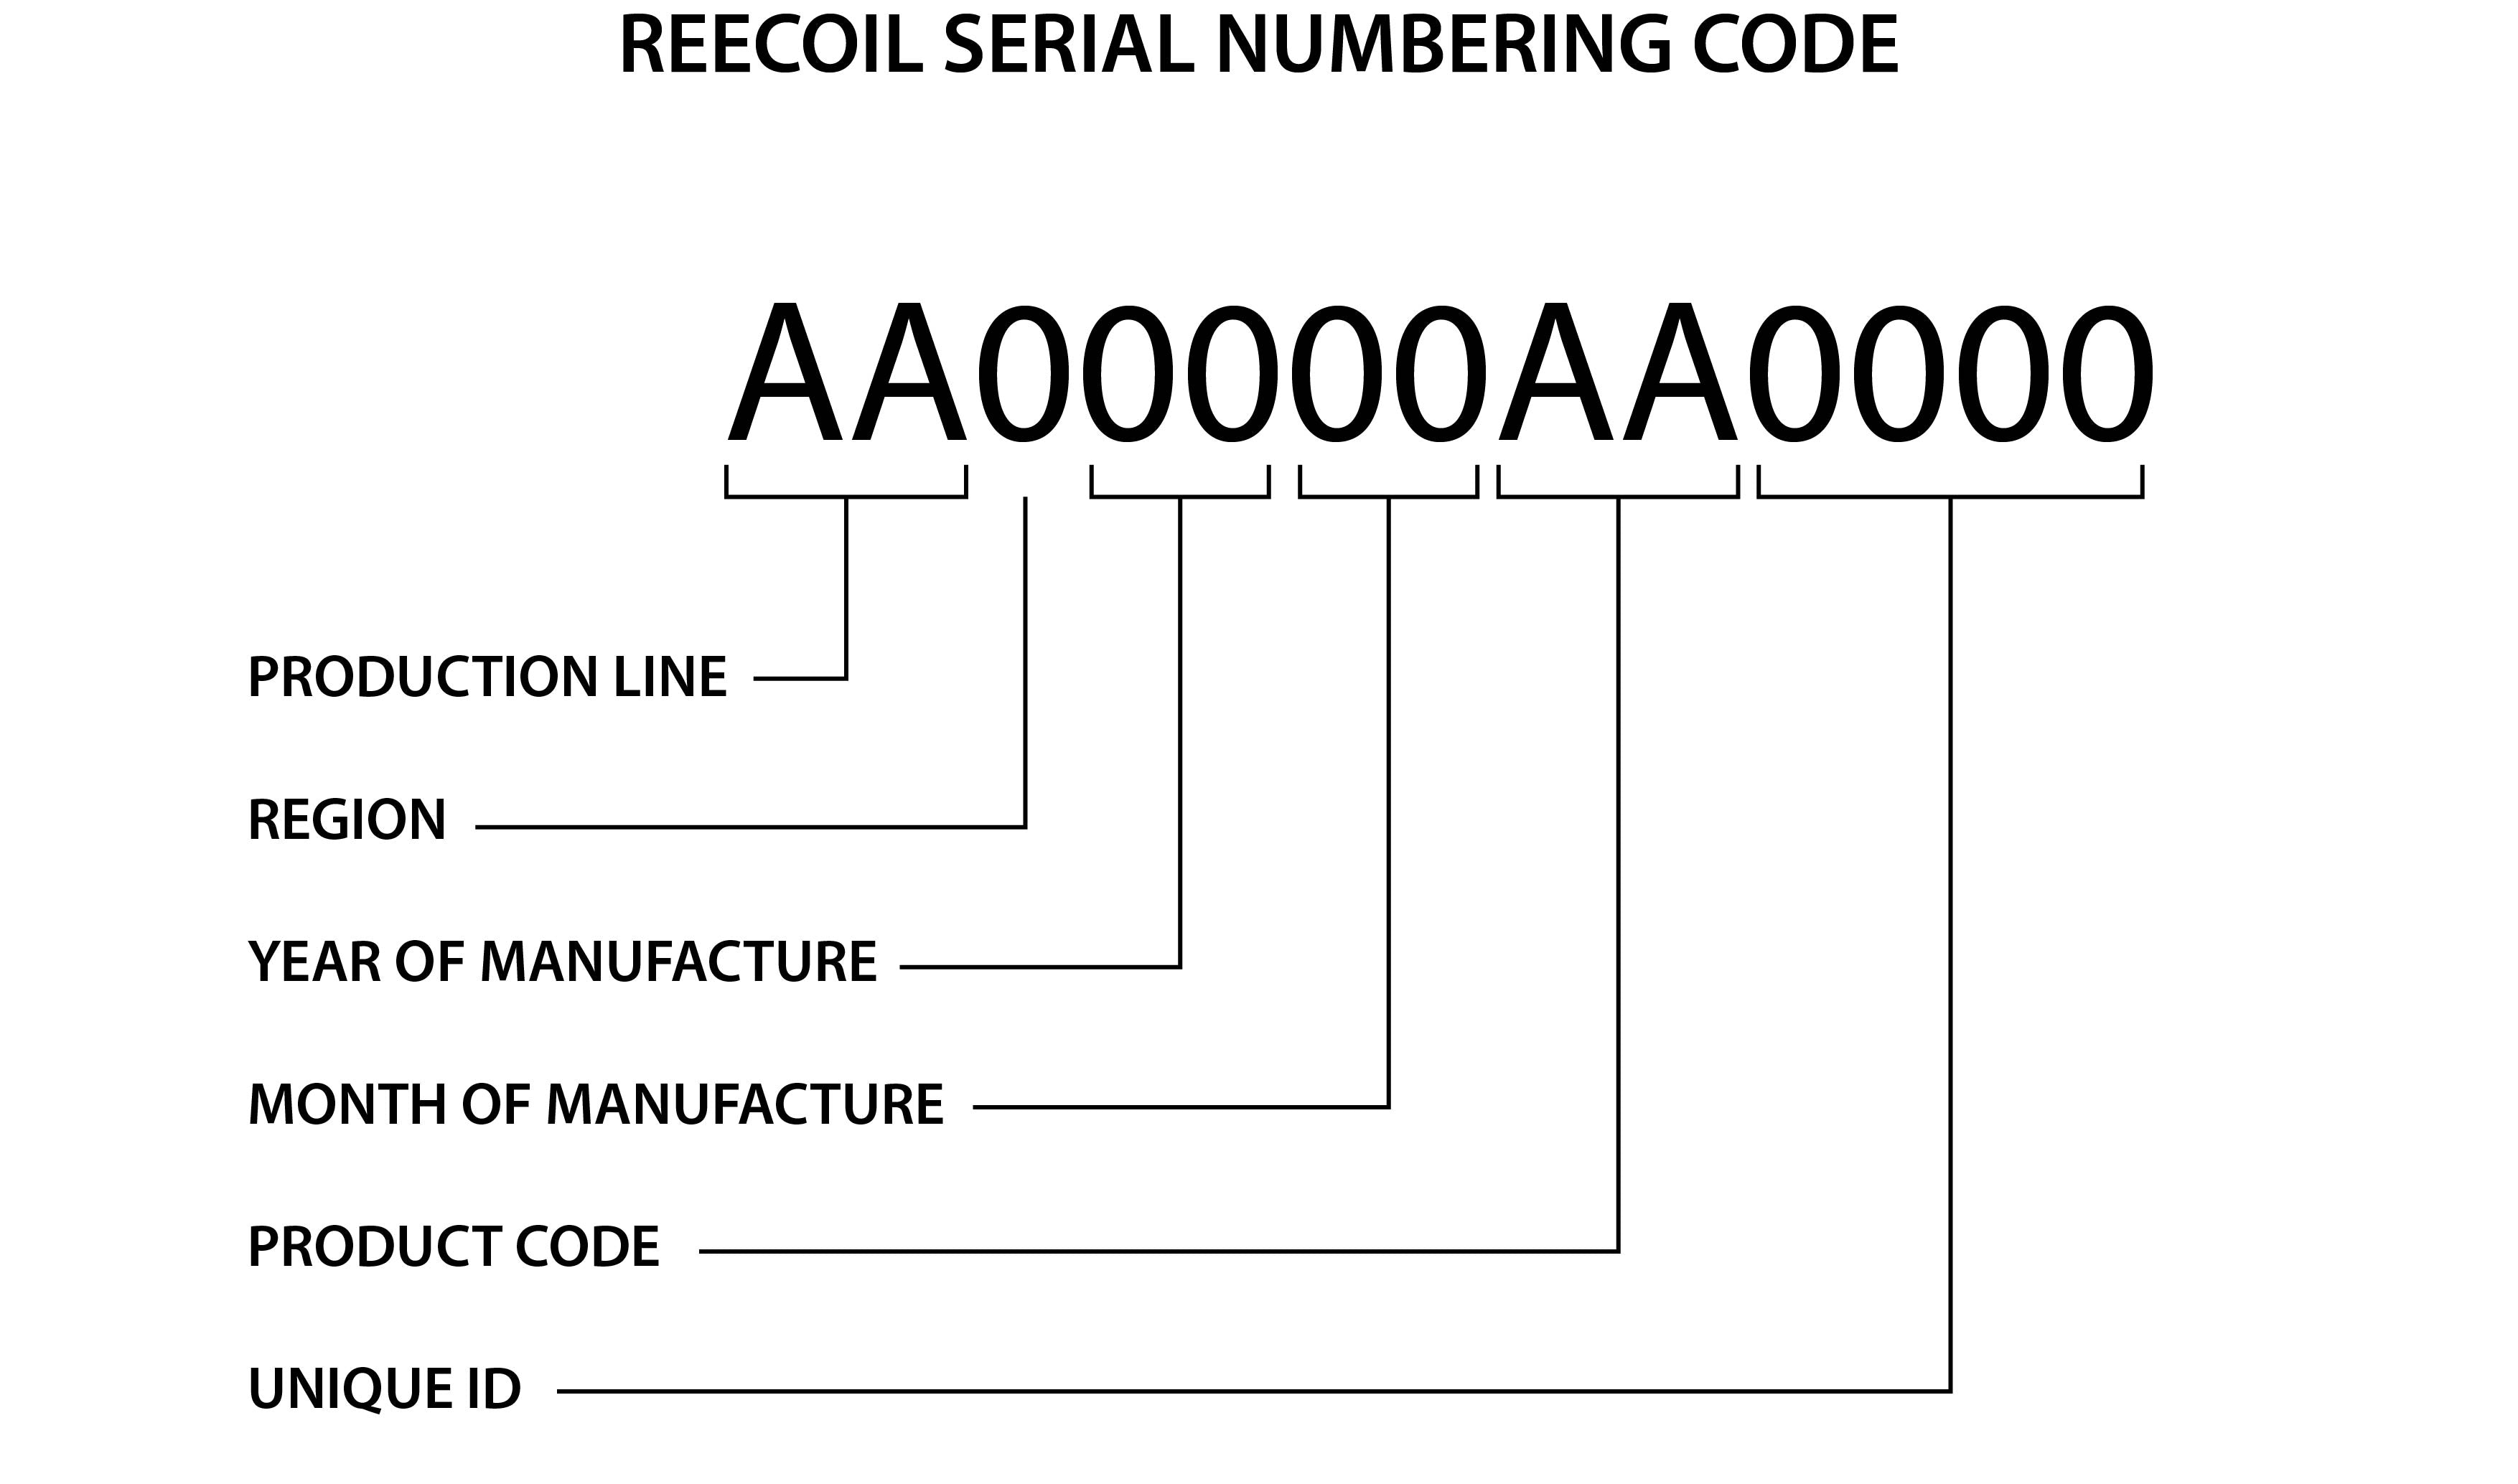 Reecoil unique serial numbering code